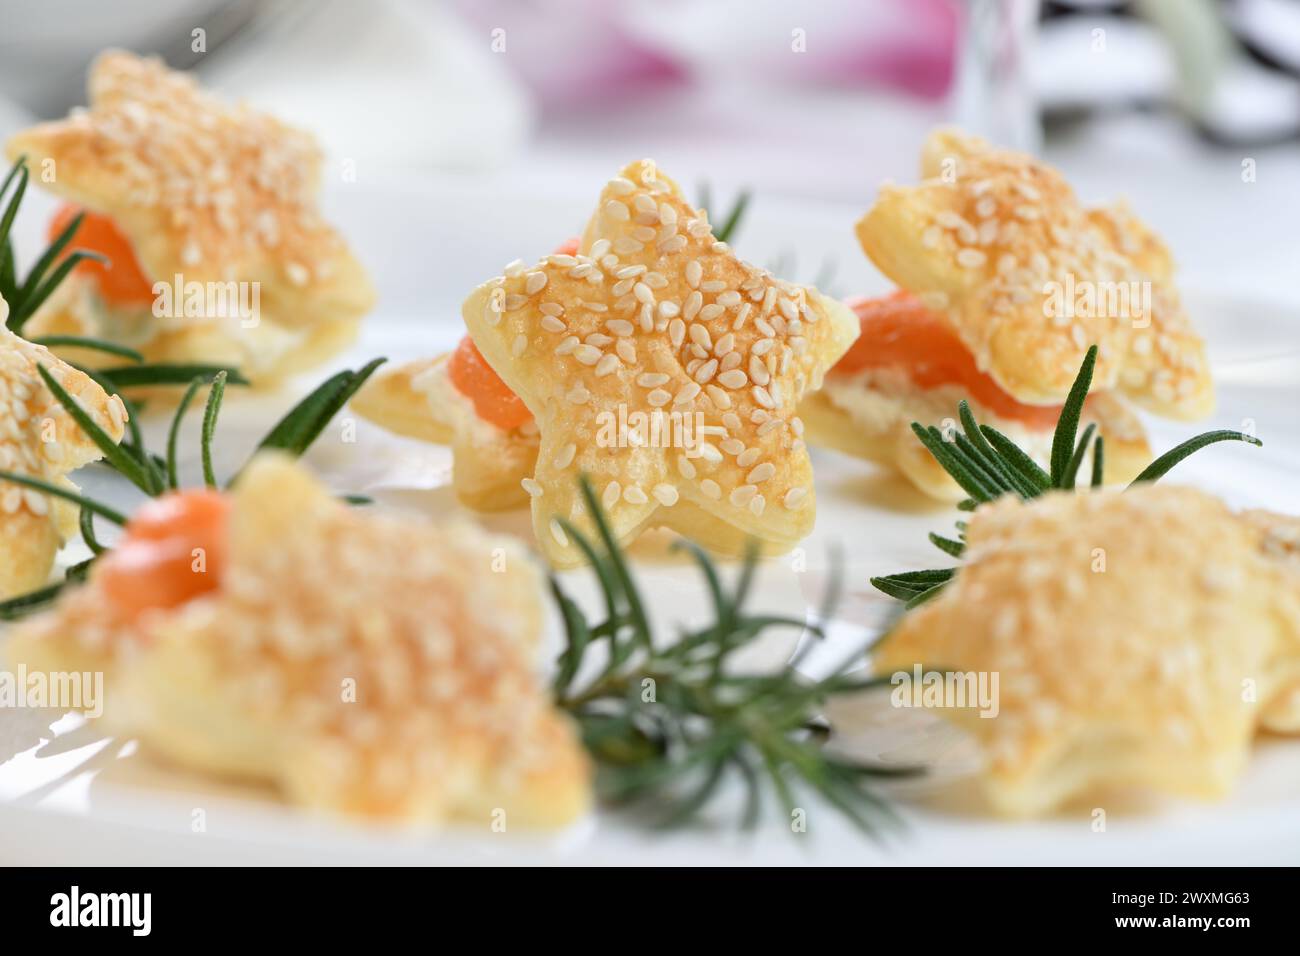 Festive appetizer of puff pastry in the shape of a star, stuffed with salmon and soft cheese. The perfect appetizer for your holiday table. Stock Photo